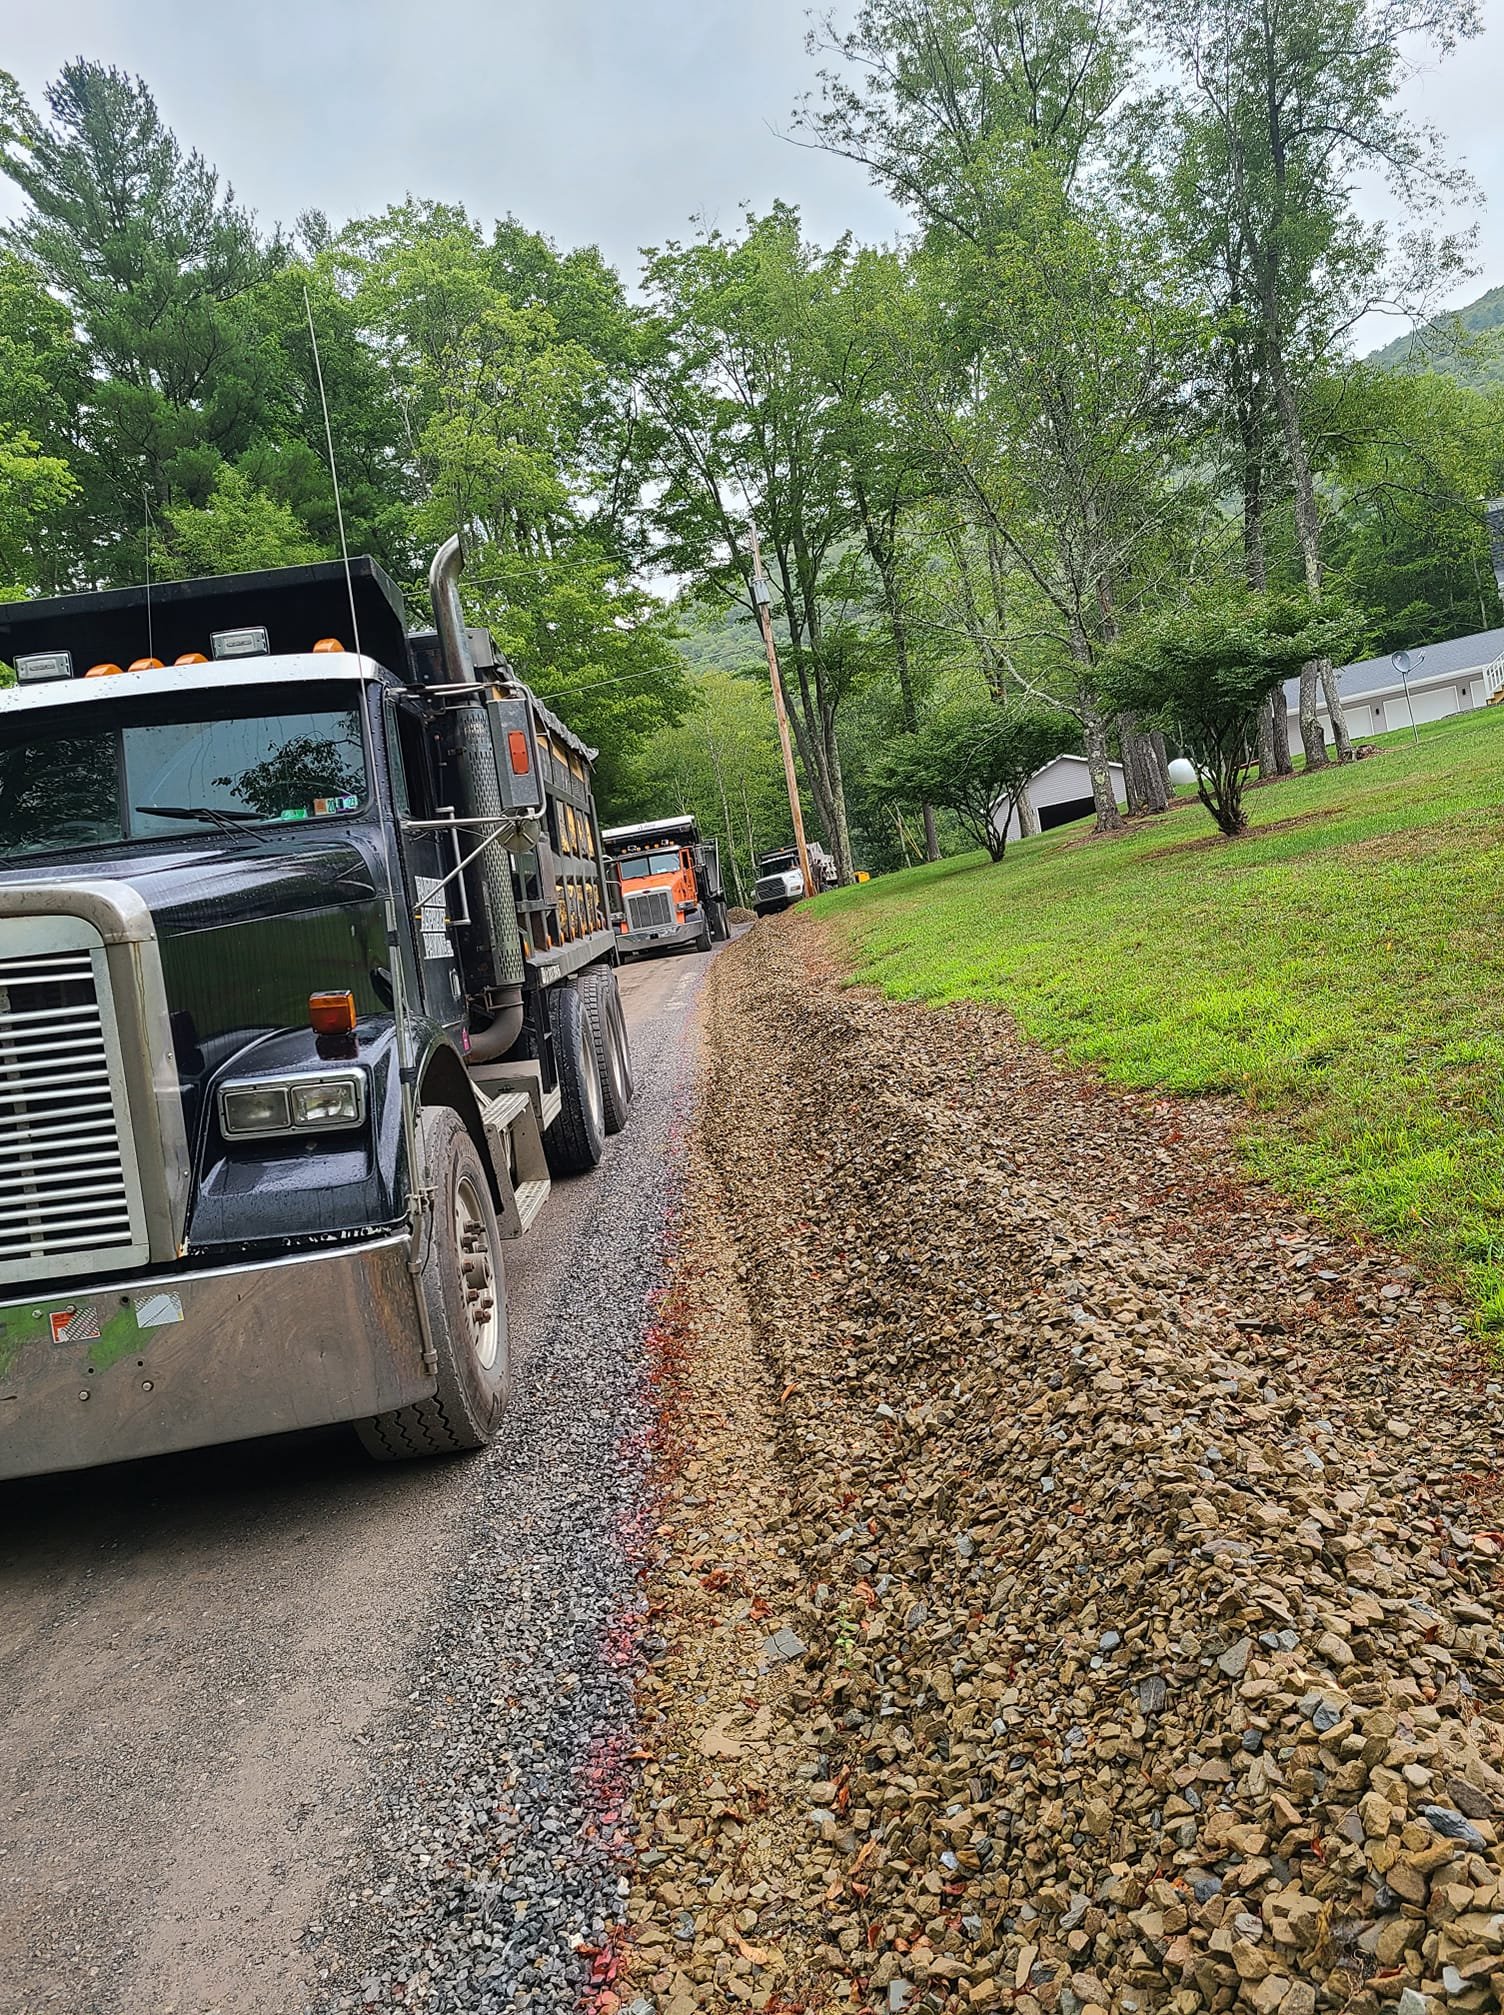 Lining up the Fairview Asphalt Paving trucks for a long residential driveway